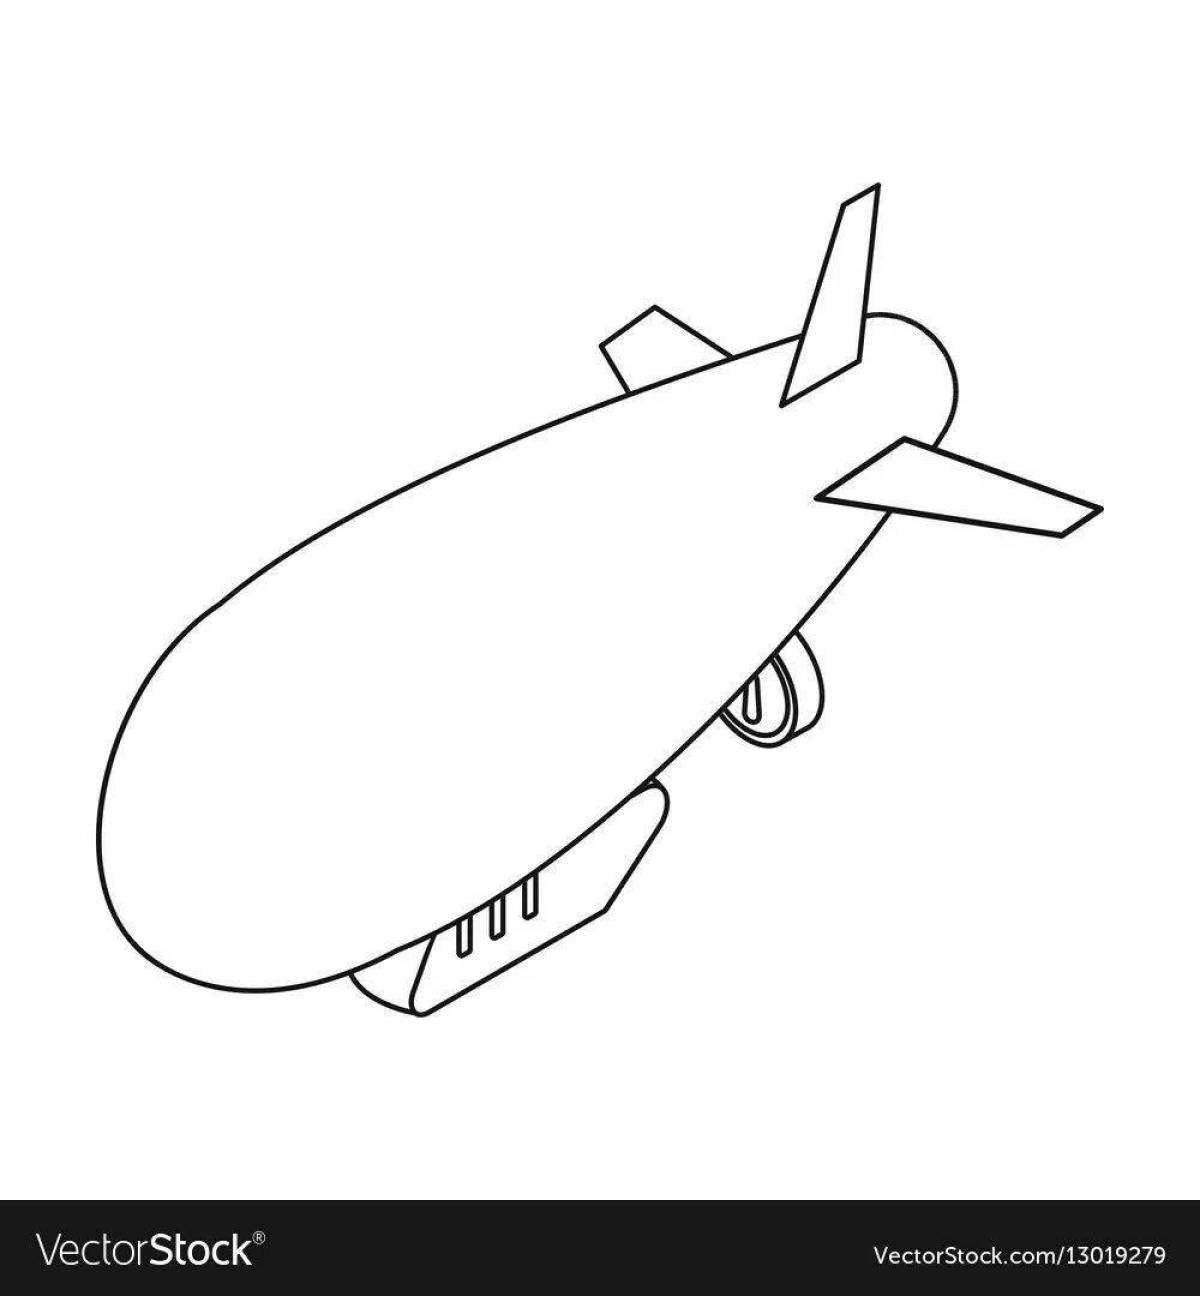 Exciting airship coloring book for kids